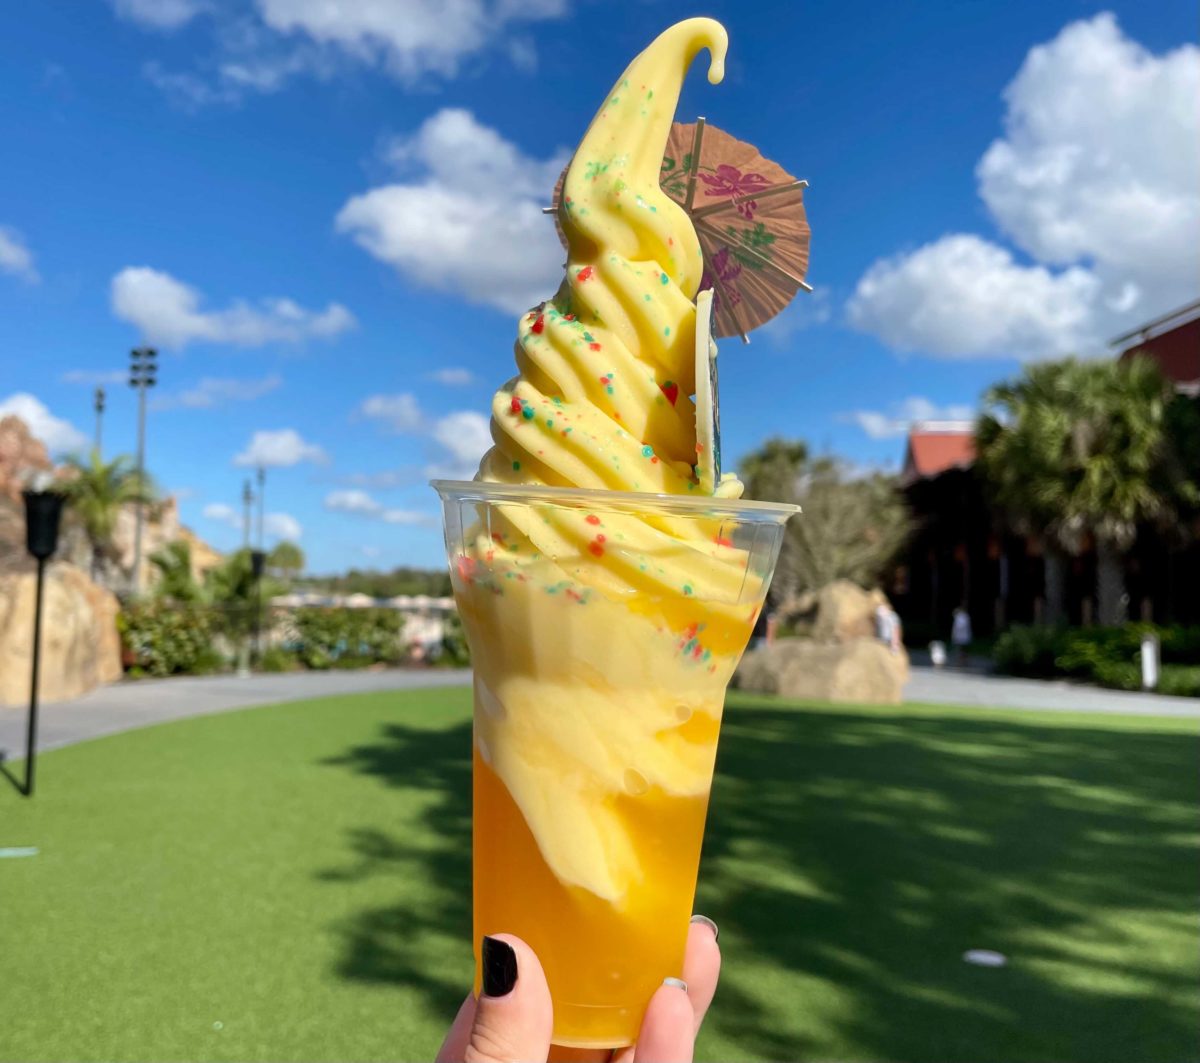 new-years-pineapple-dole-whip-float-5-1744245